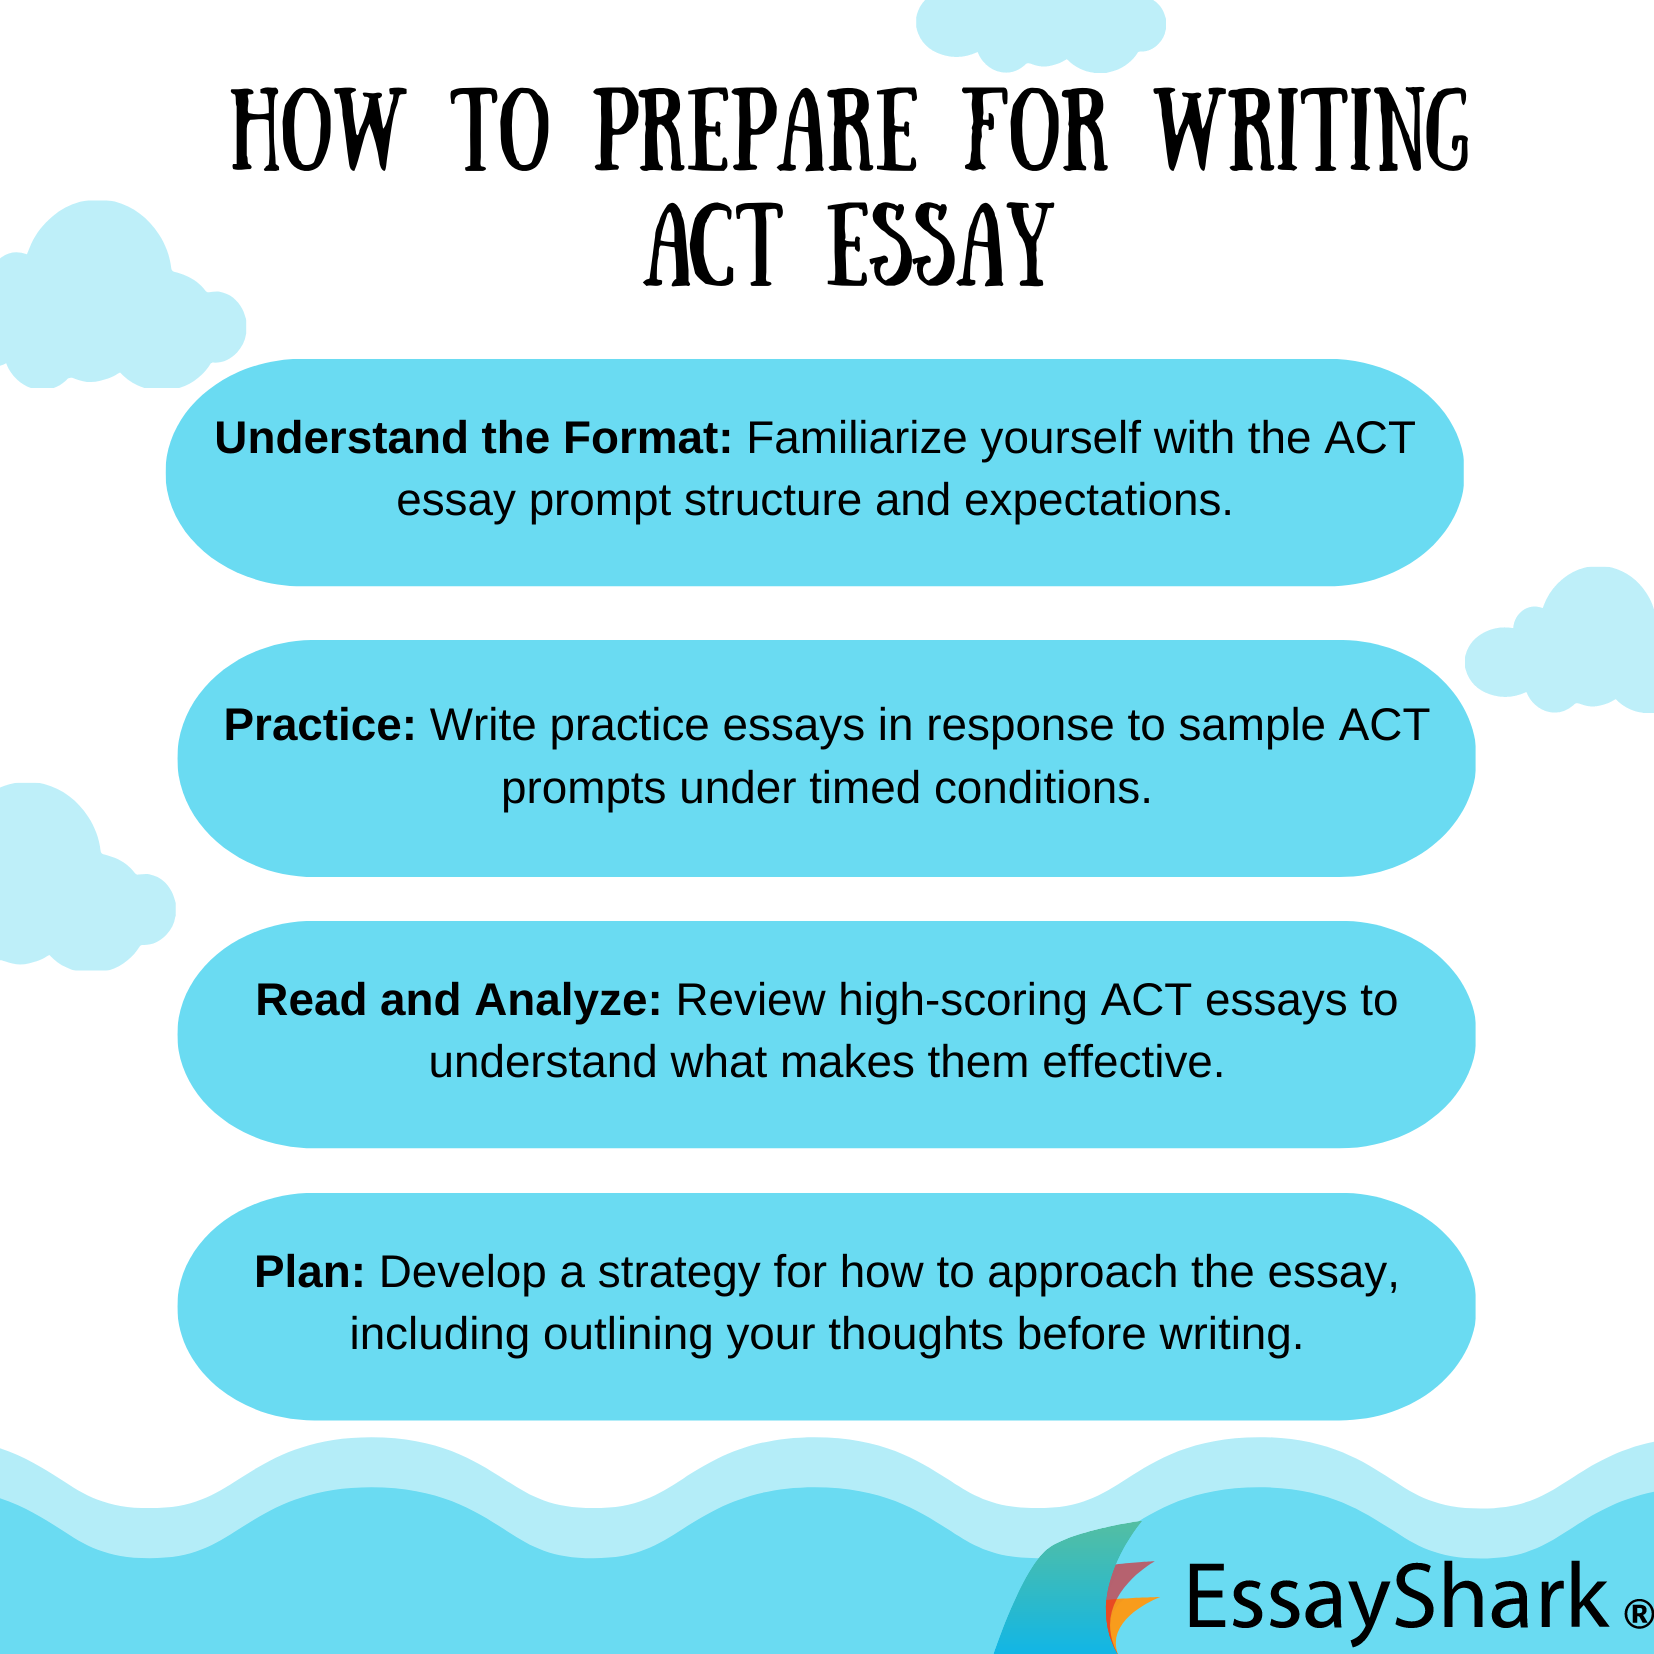 How to prepare for writing ACT essay